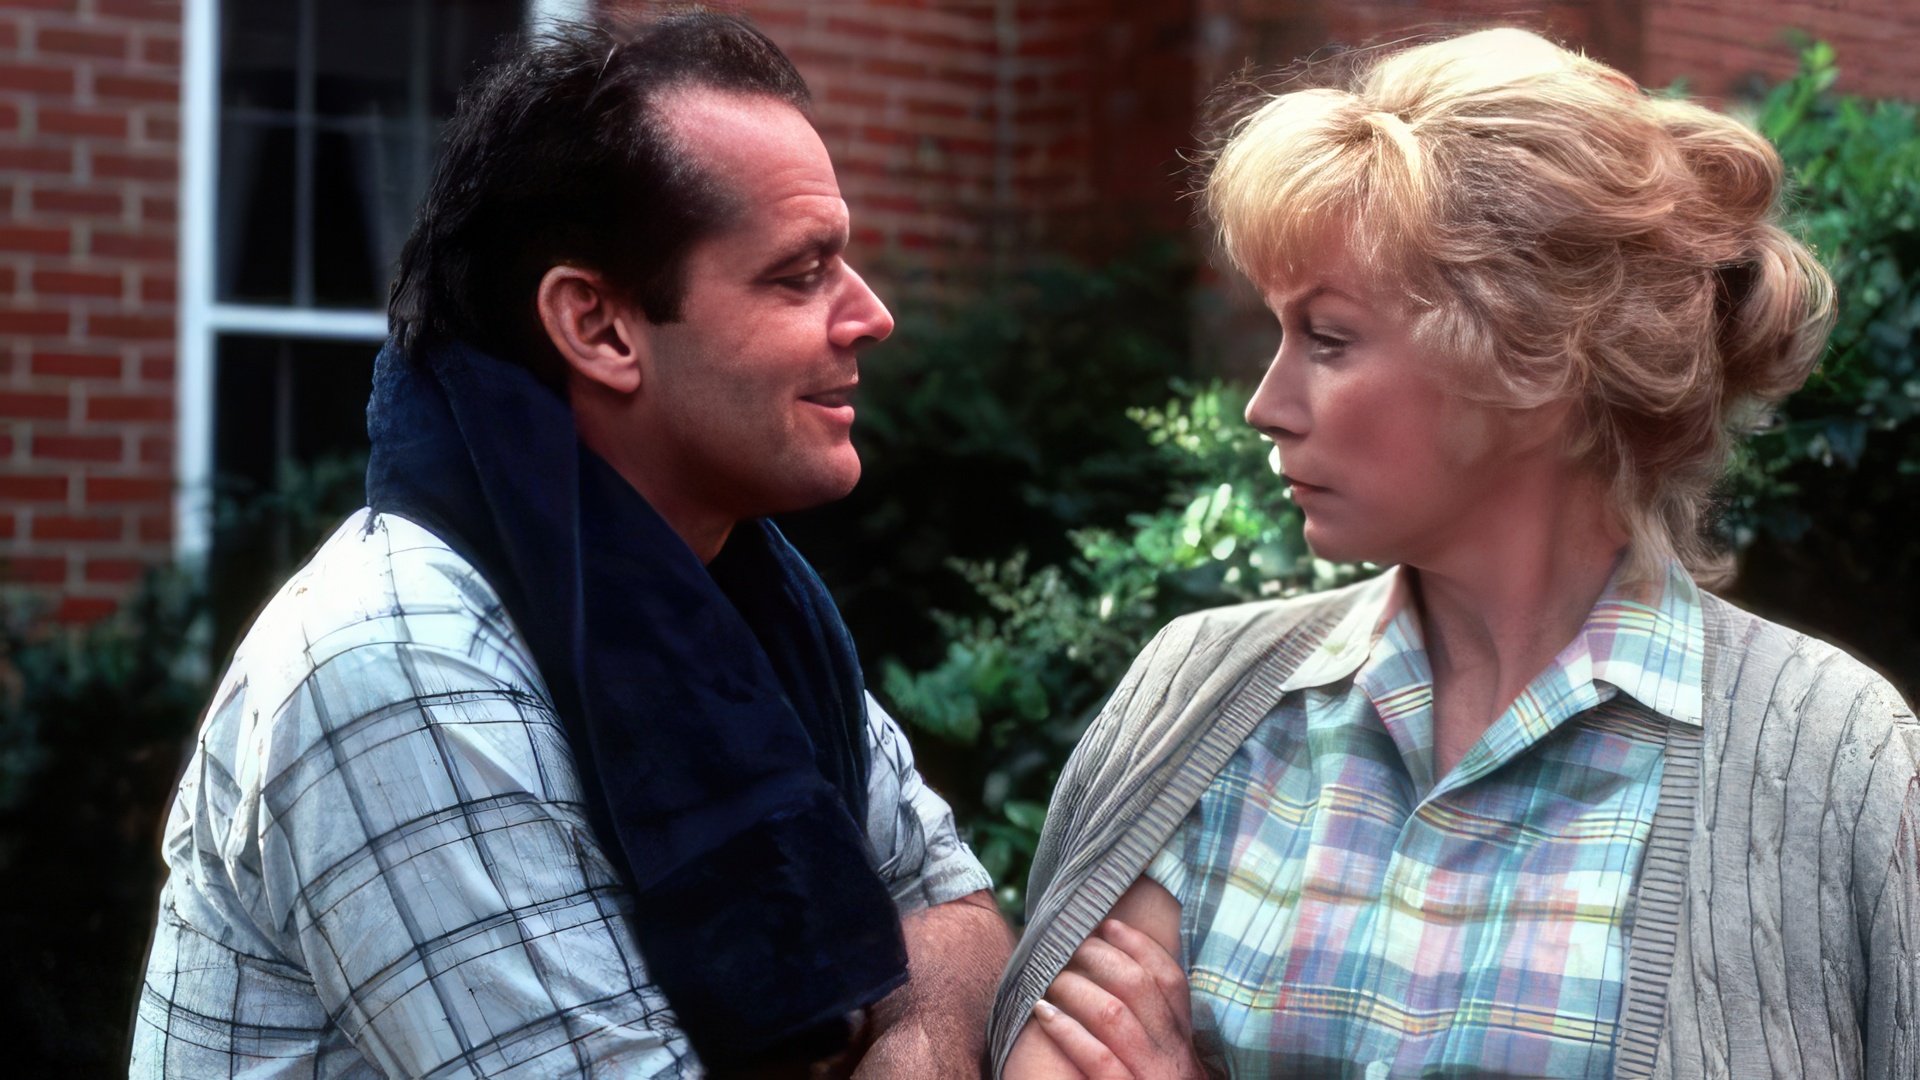 A scene from “Terms of Endearment”